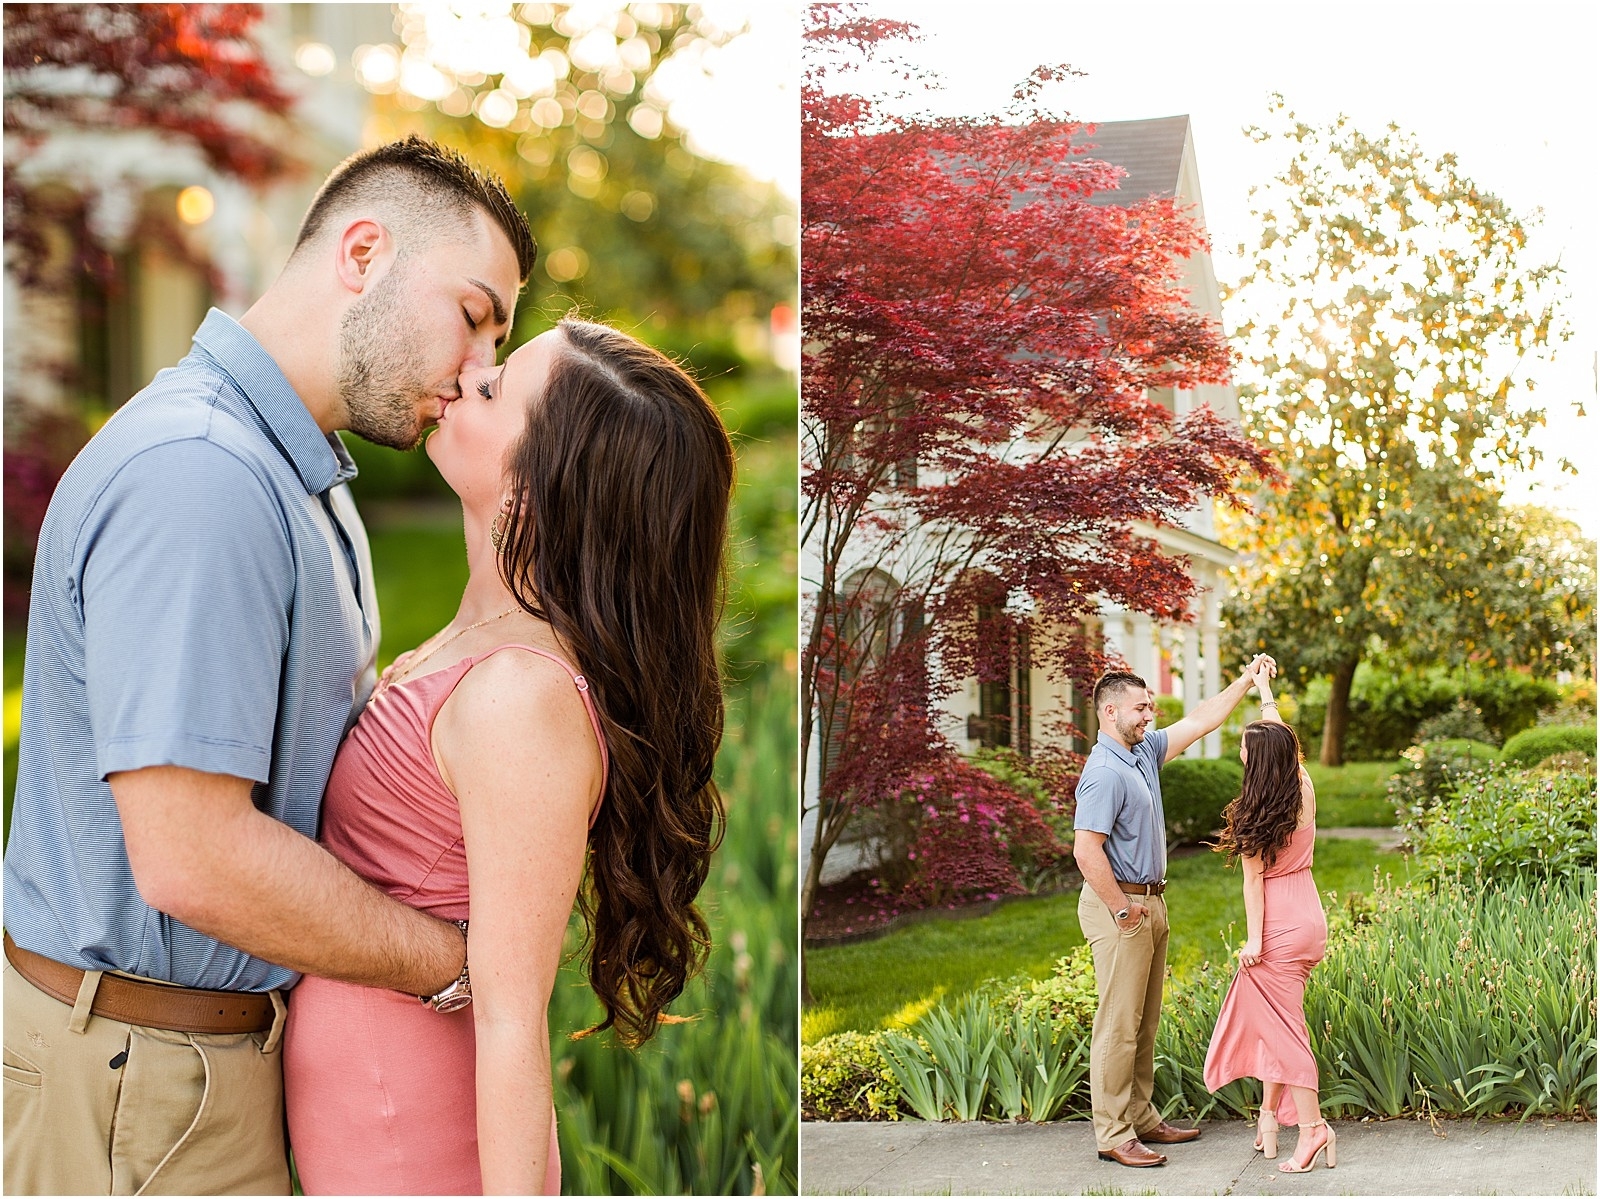 The Best of Engagement Sessions 2020 Recap0047.jpg